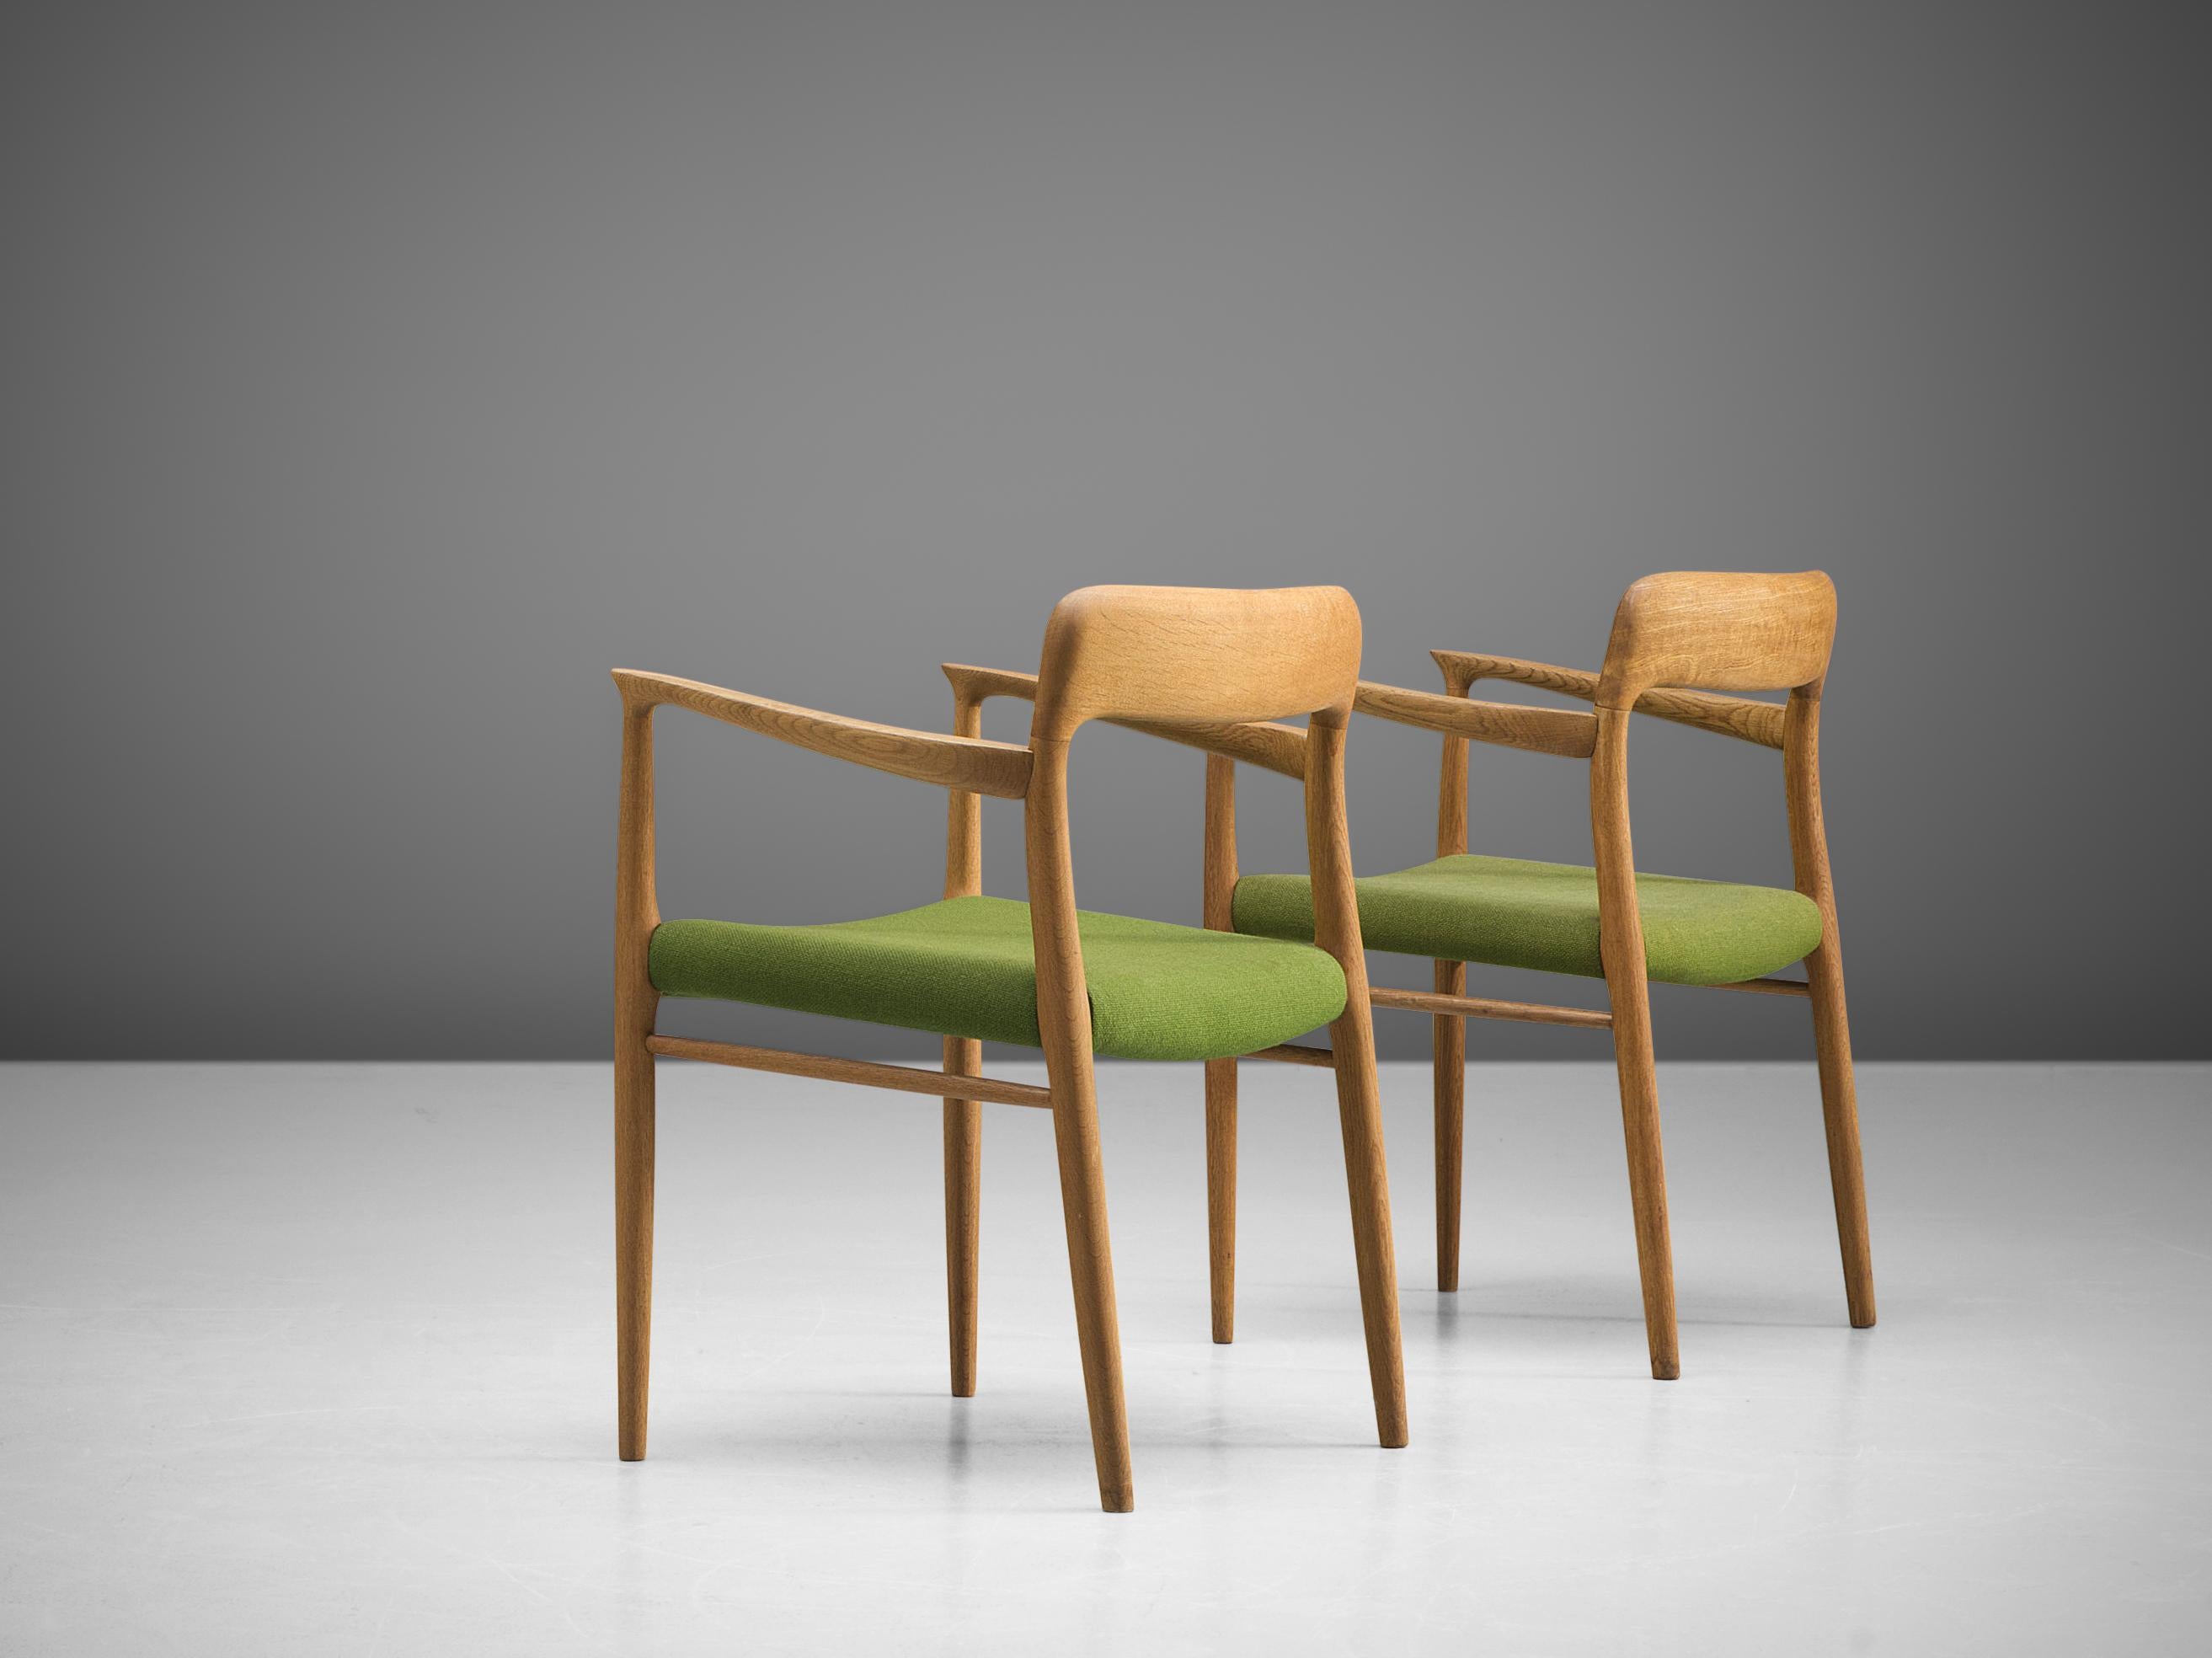 Niels Otto Møller for J. L. Møller, pair of chairs model '56', in oak and green fabric, Denmark, 1954. 
 
This chair shows subtle lines and beautiful curves of the woodwork. In the highly refined connections of the wood you can see the work of an